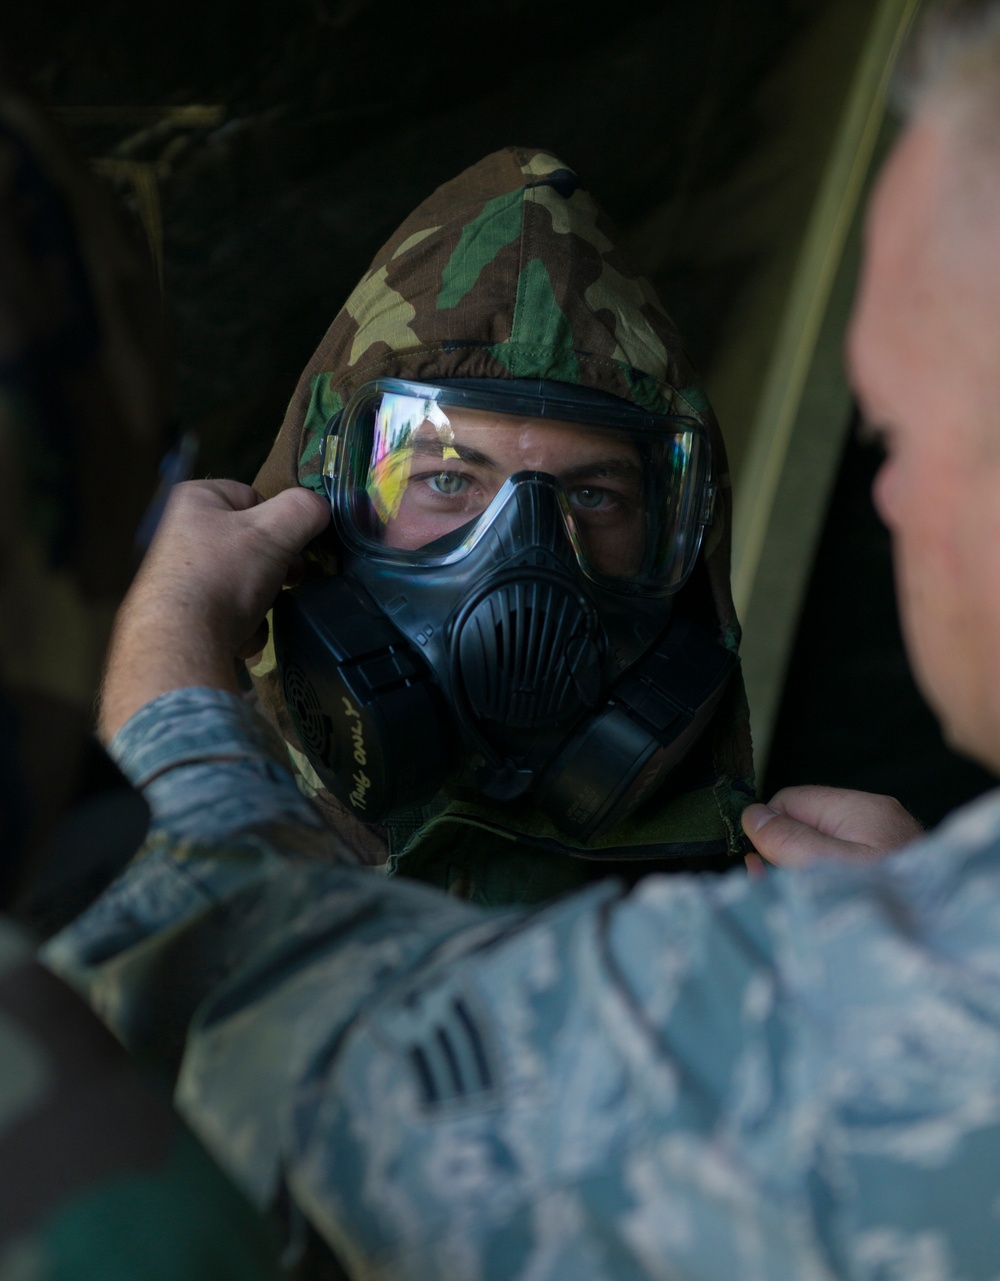 the 914th Air Refueling Wing conducts Annual Readiness Assessment